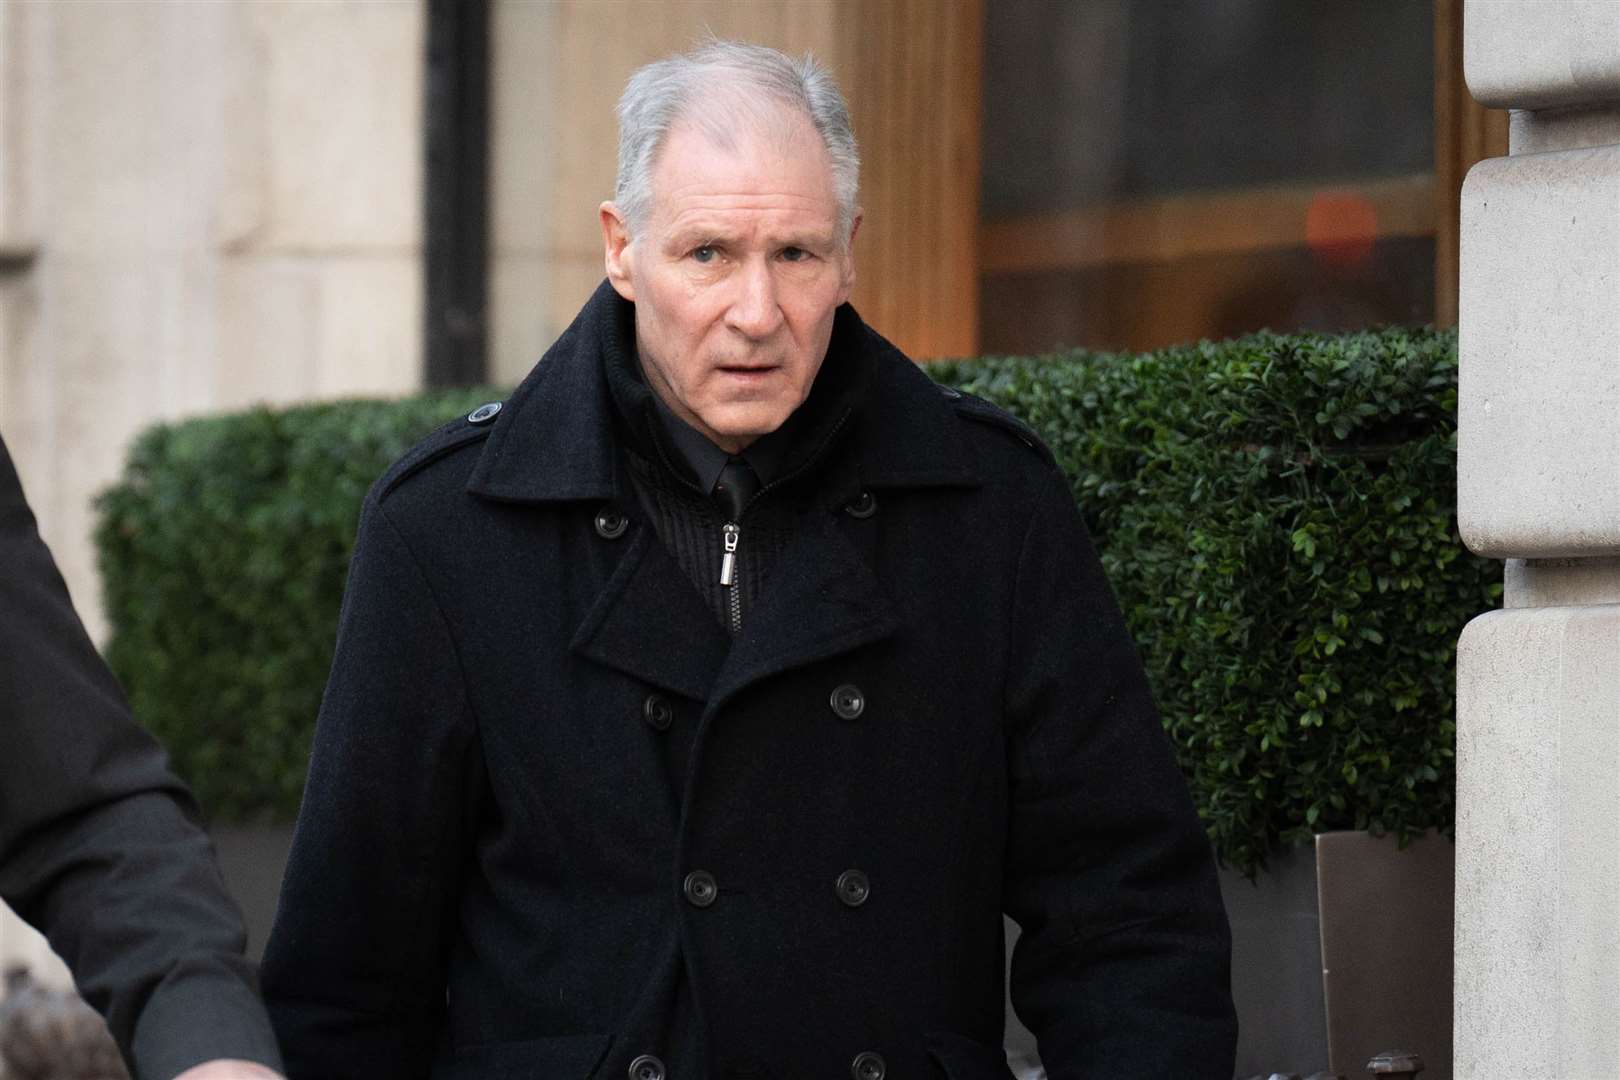 Post Office investigator Stephen Bradshaw gave evidence at the public inquiry at Aldwych House on Thursday (James Manning/PA)